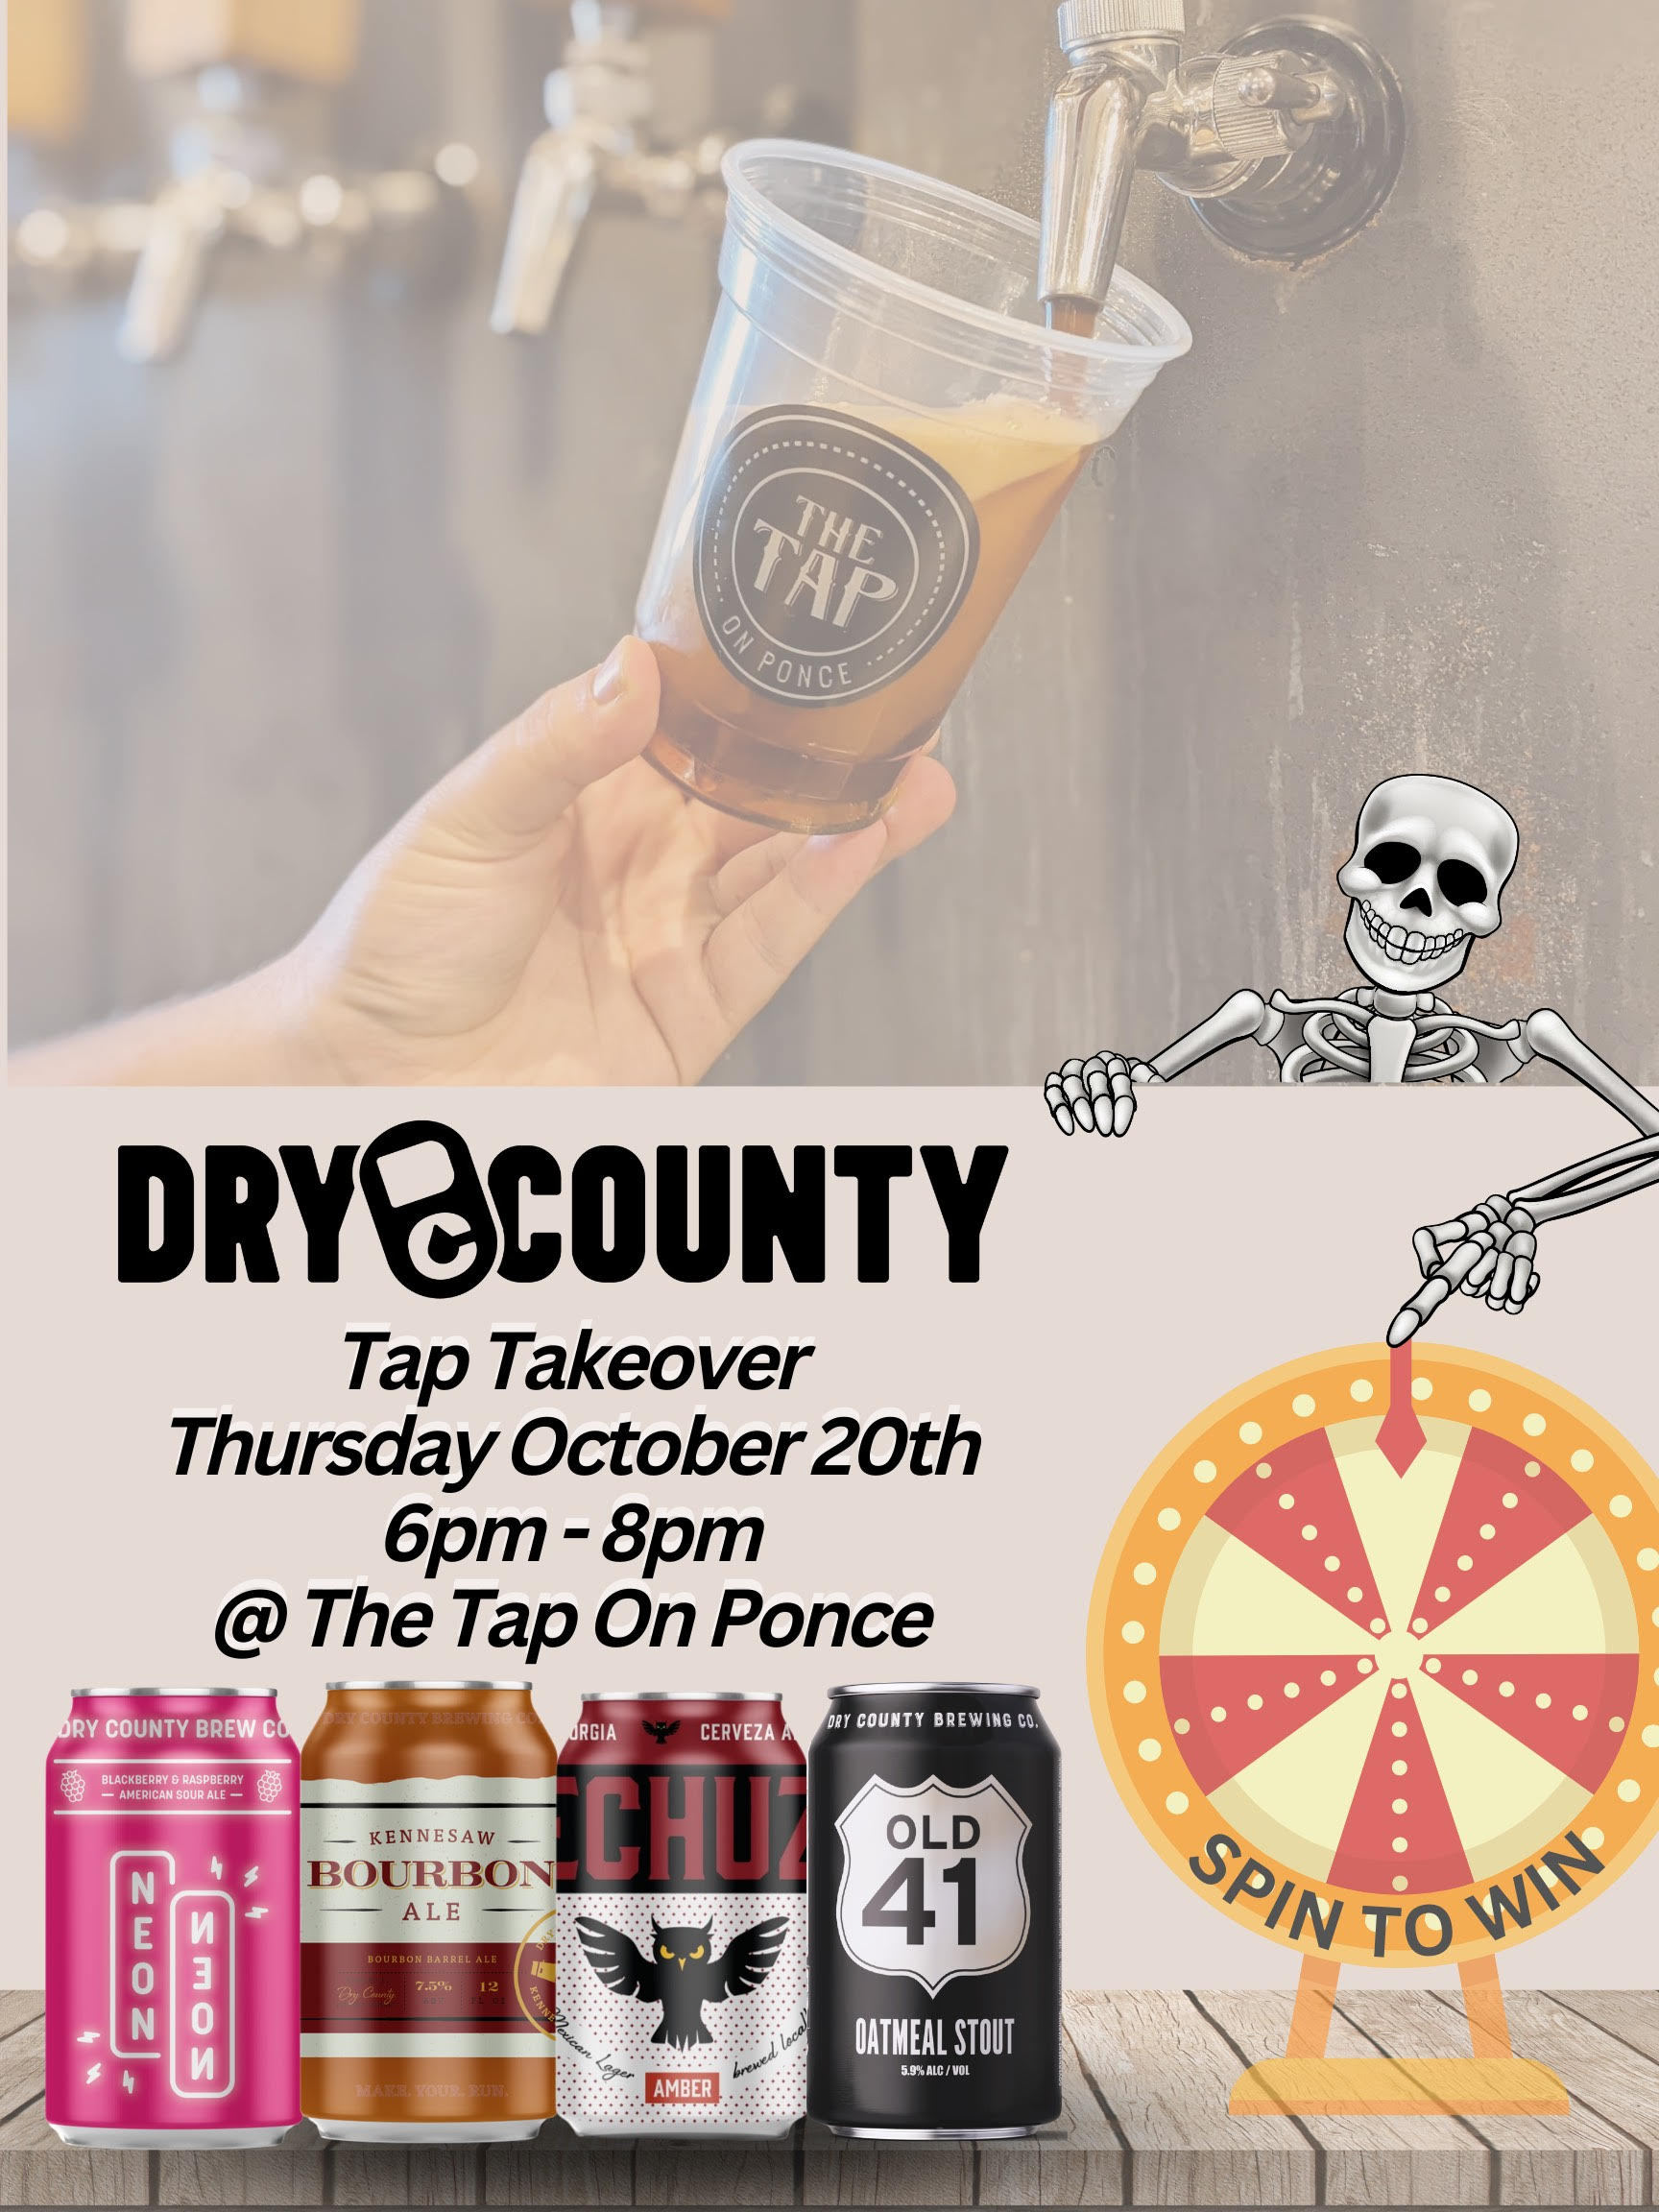 Dry County Brewing - Tap Takeover & Tasting